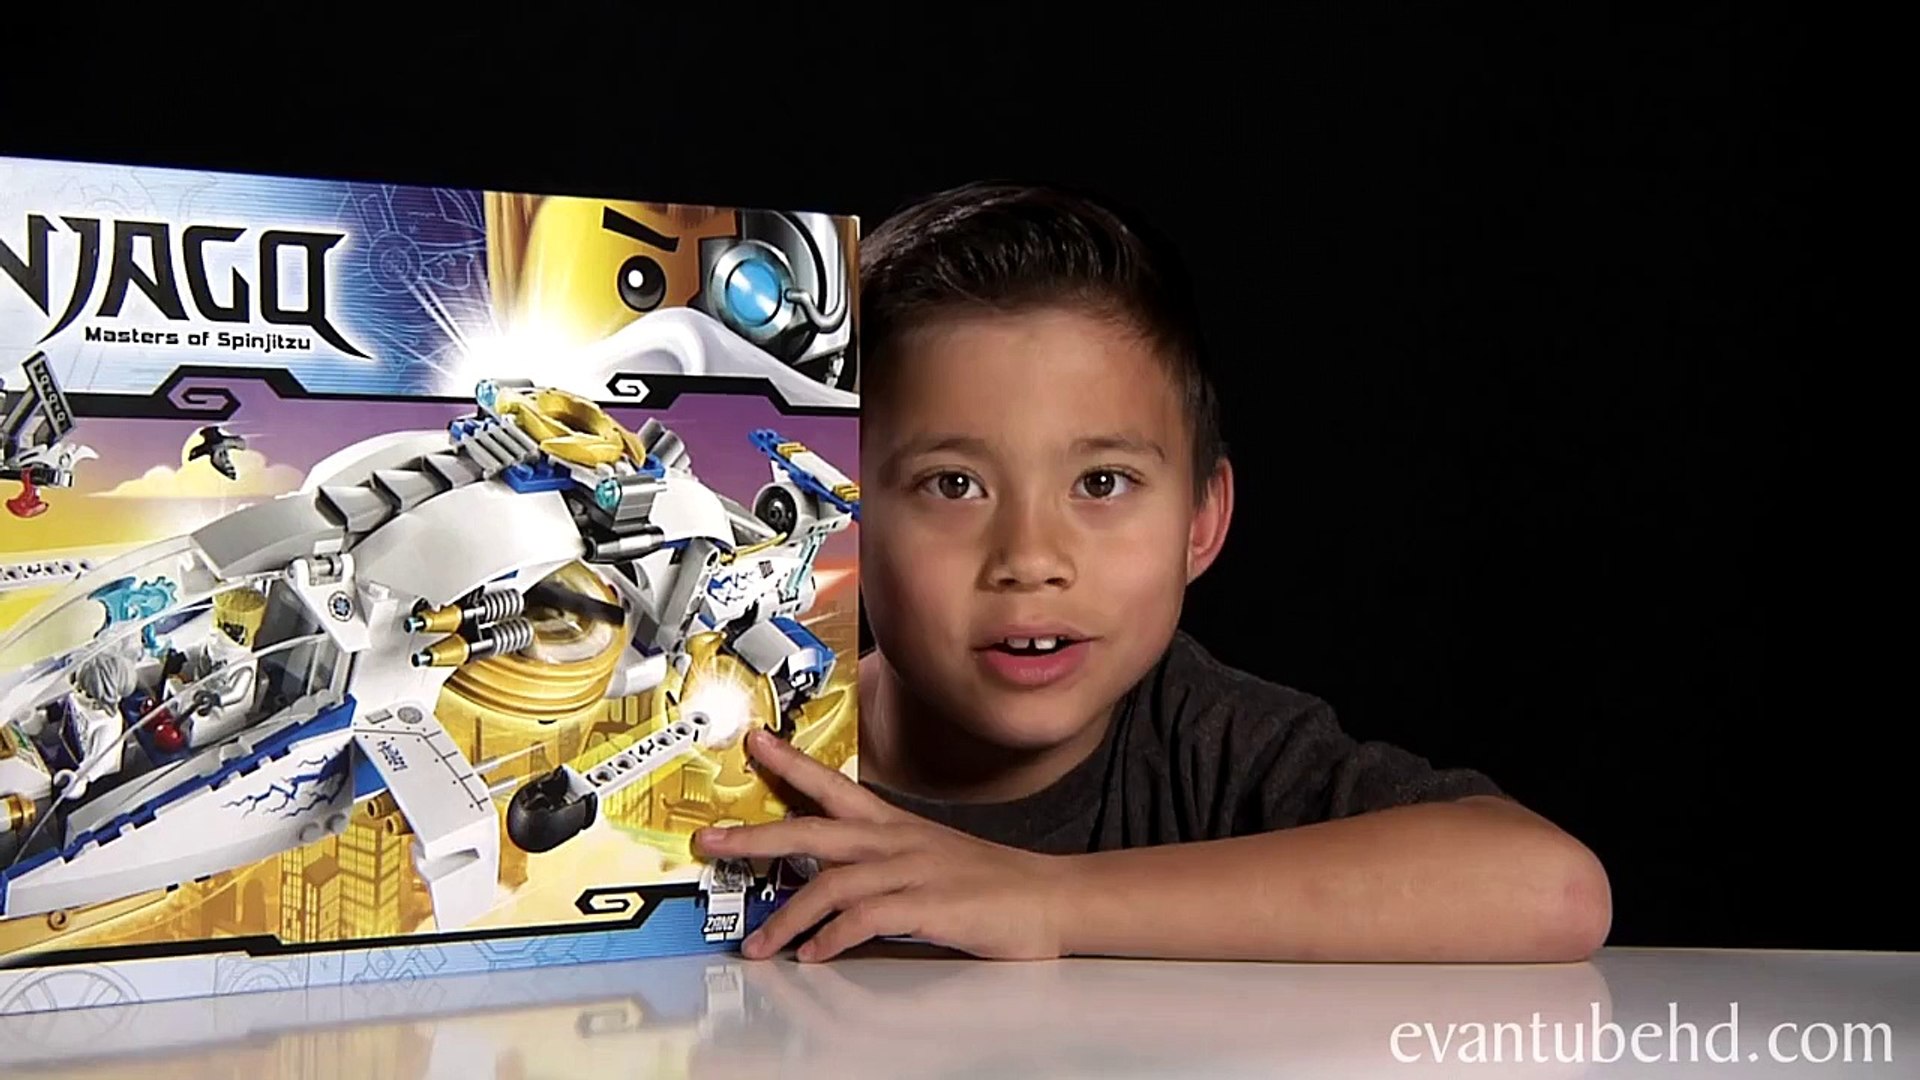 NINJACOPTER LEGO NINJAGO 2014 Set 70724 Time lapse Build, Unboxing &  Review! - Dailymotion Video